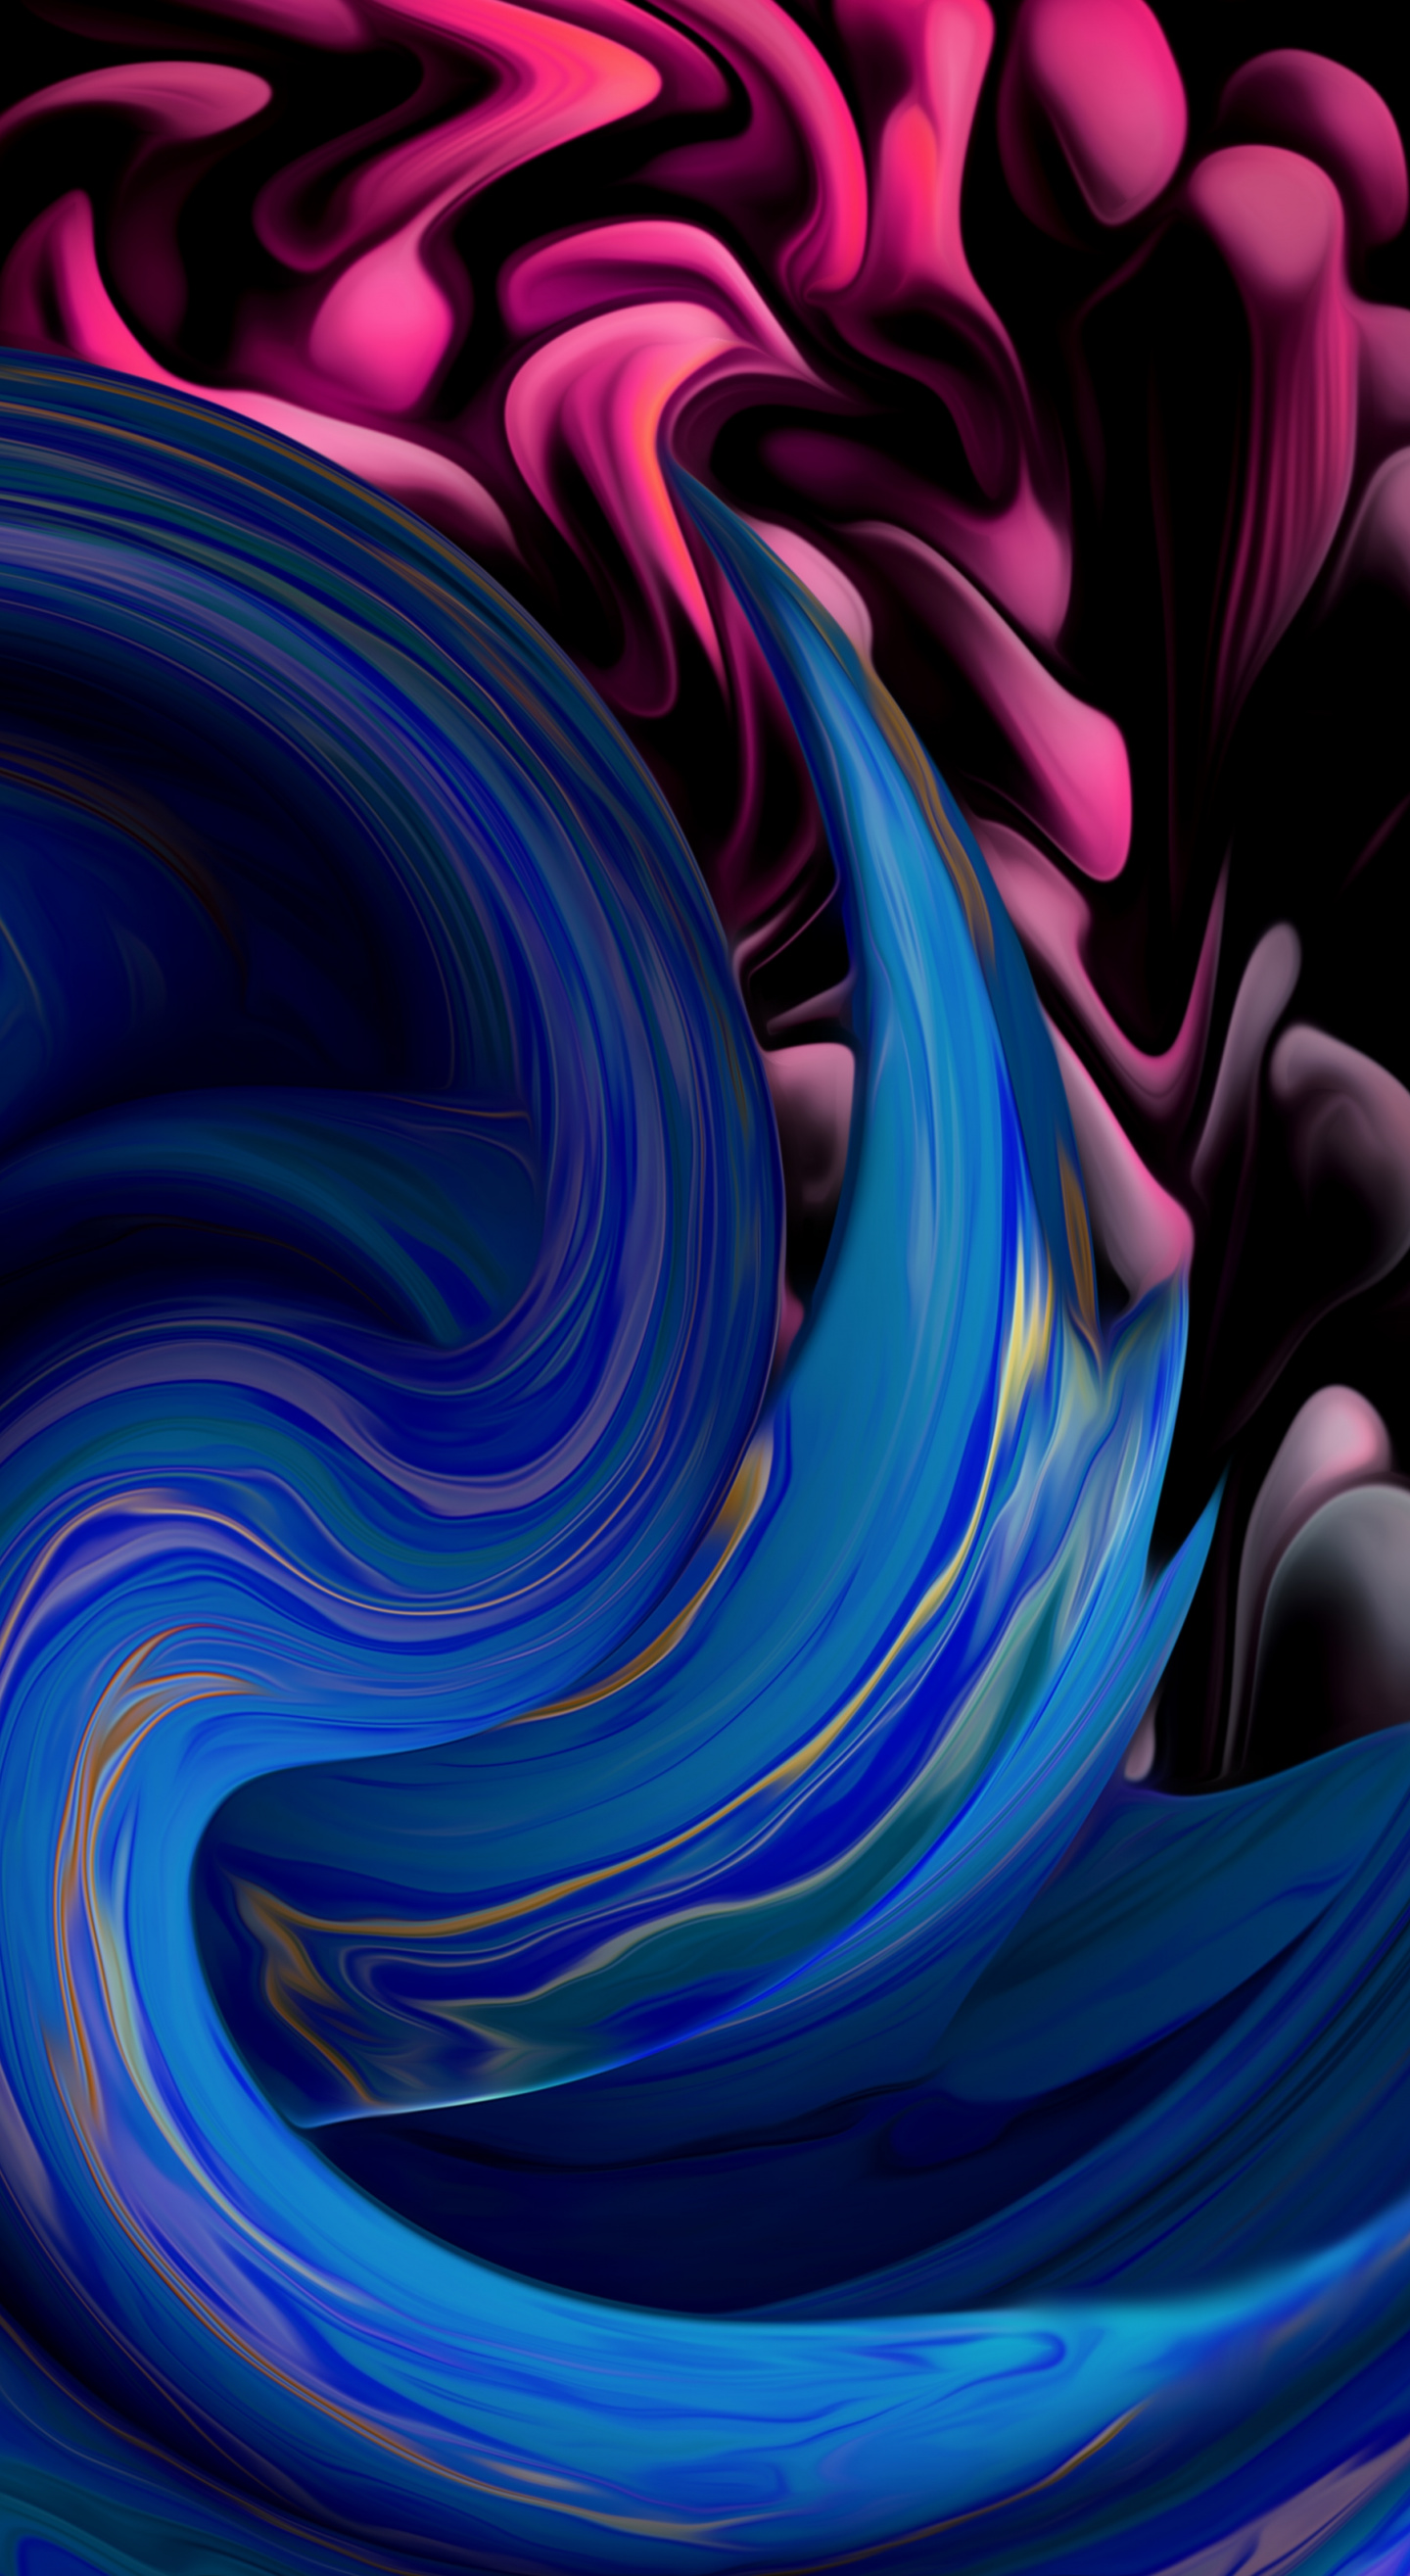 Download Curves, fluid pattern, abstract wallpaper, 1440x Samsung Galaxy Note 8